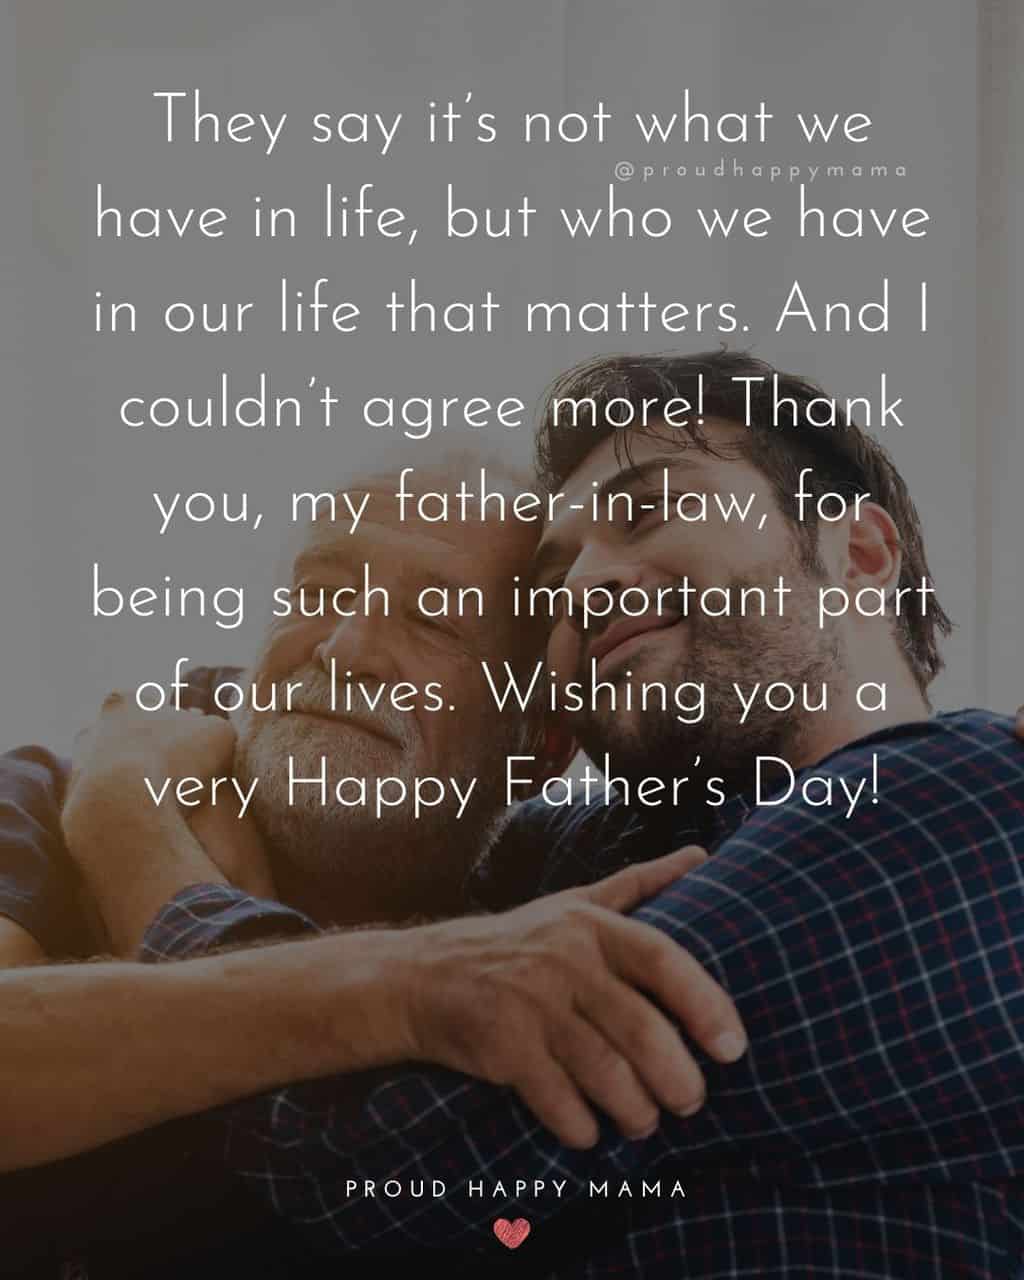 Happy Fathers Day Quotes For Father In Law - They say it’s not what we have in life, but who we have in our life that matters.